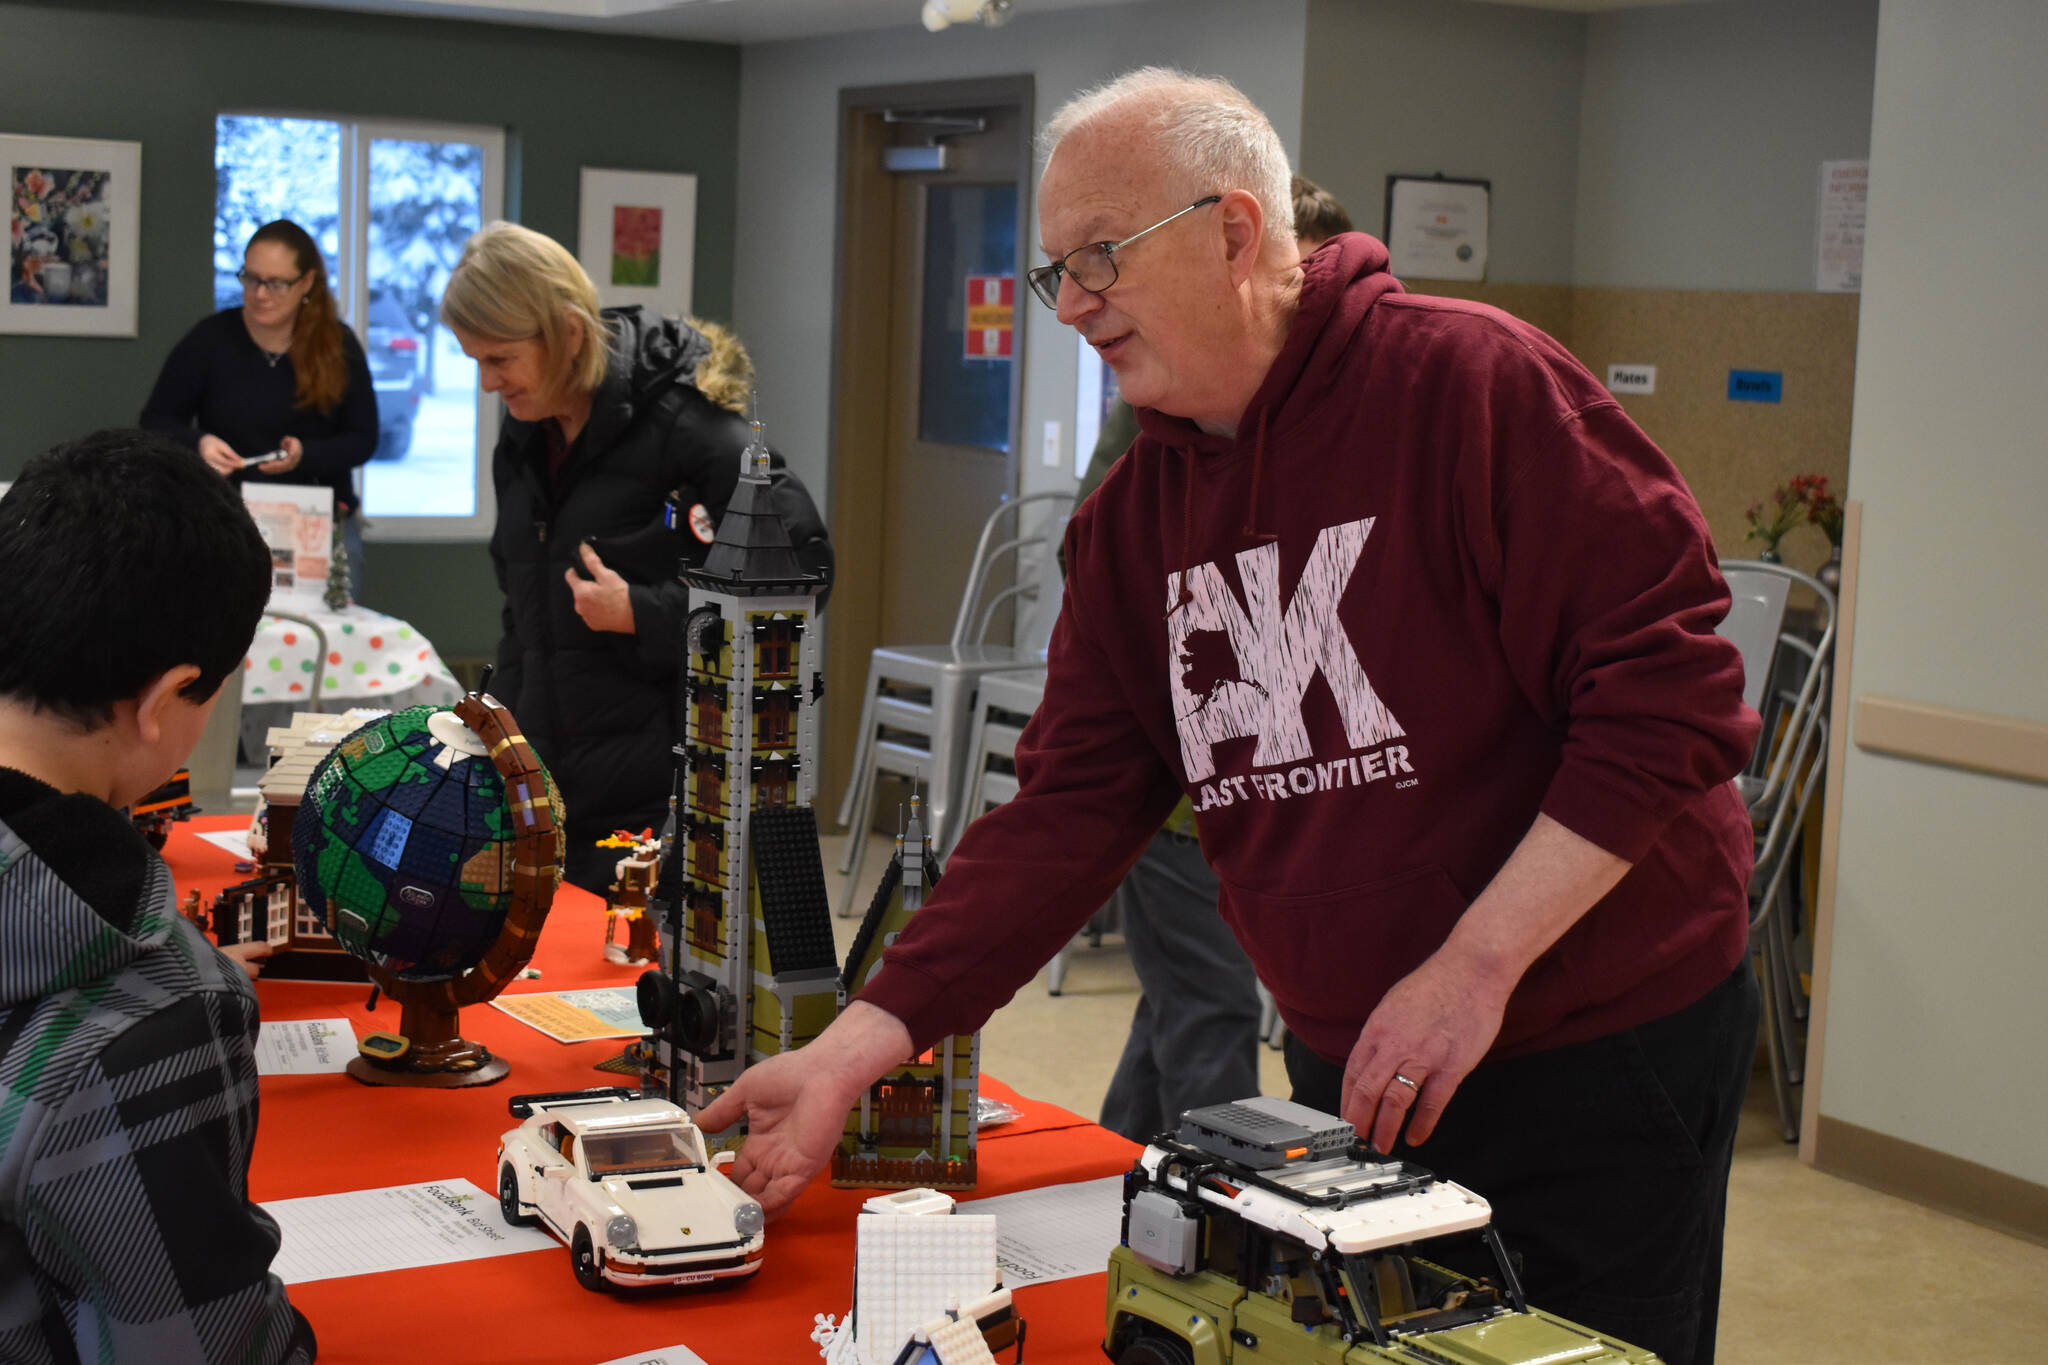 Greg Meyer shows off the Lego sets he built as they are put on auction during Bark, Block and Bowl on Saturday, Dec. 10, 2022, at the Kenai Peninsula Food Bank in Soldotna, Alaska. (Jake Dye/Peninsula Clarion)